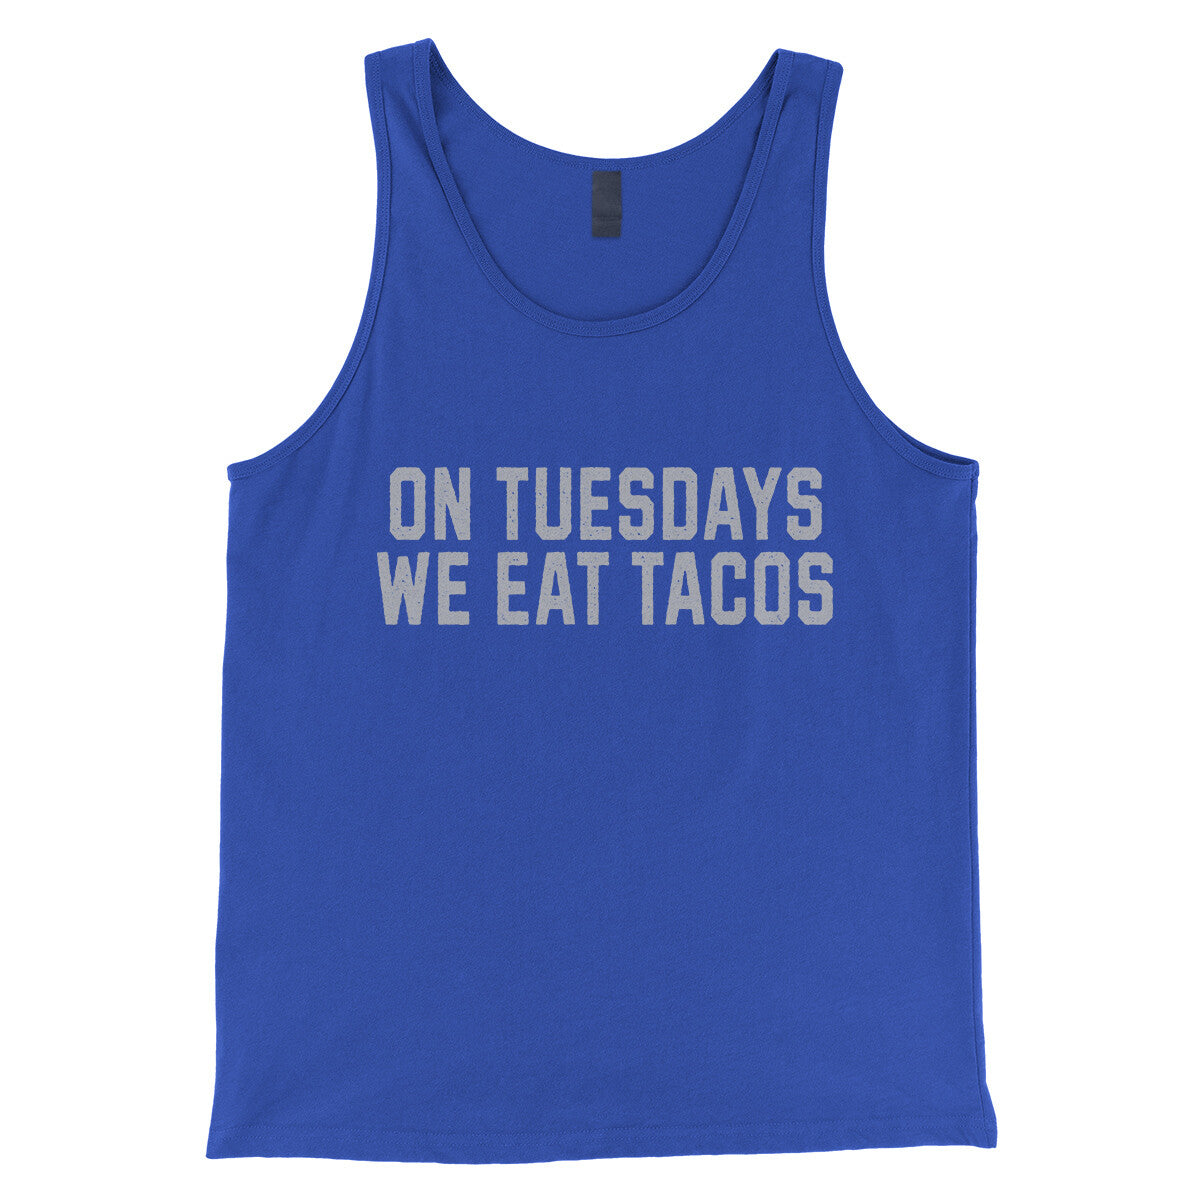 On Tuesdays We Eat Tacos in True Royal Color